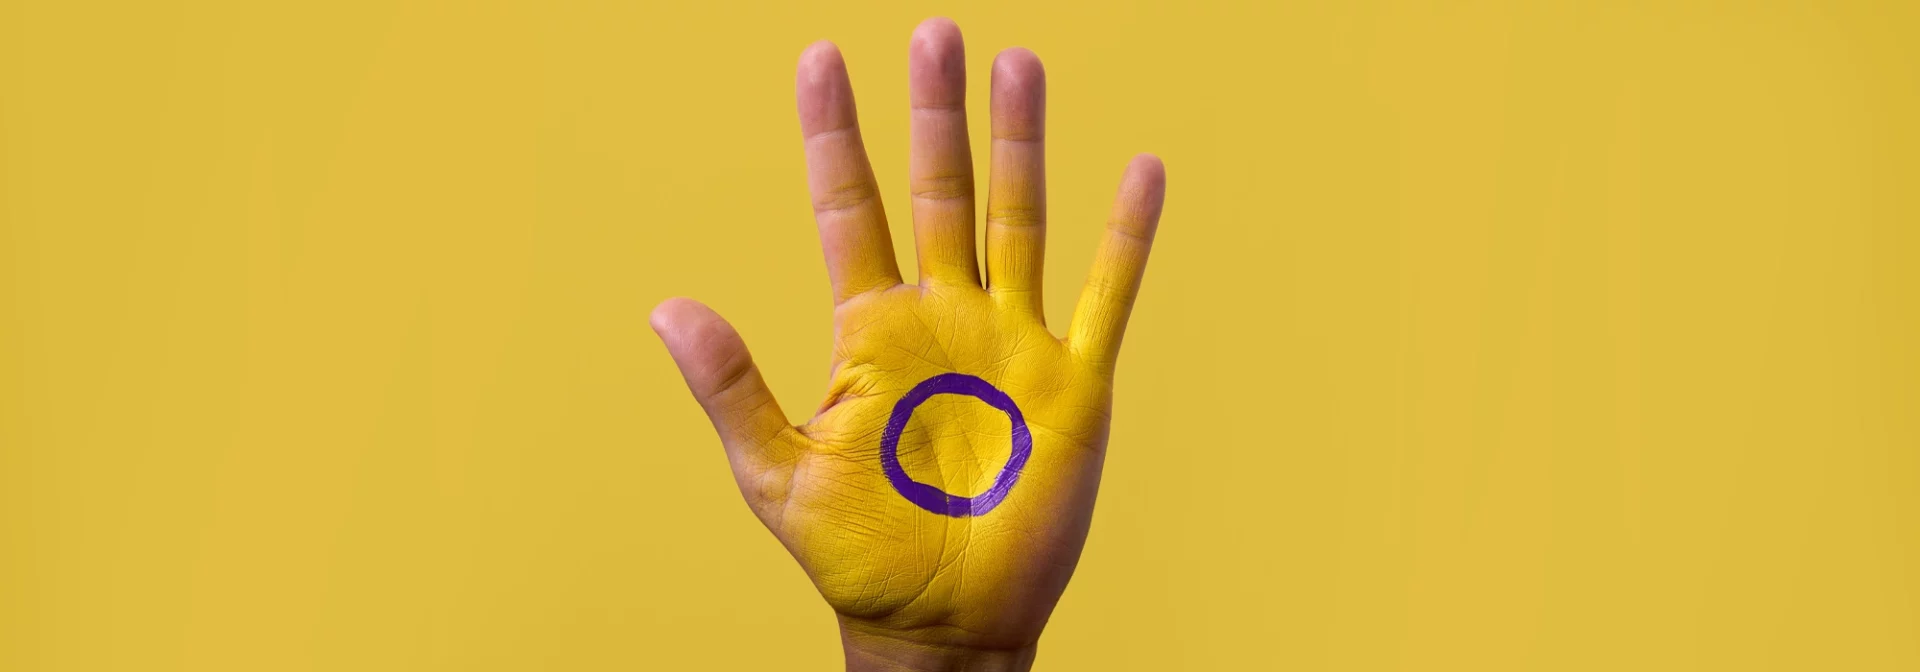 intersex flag and symbol on hand